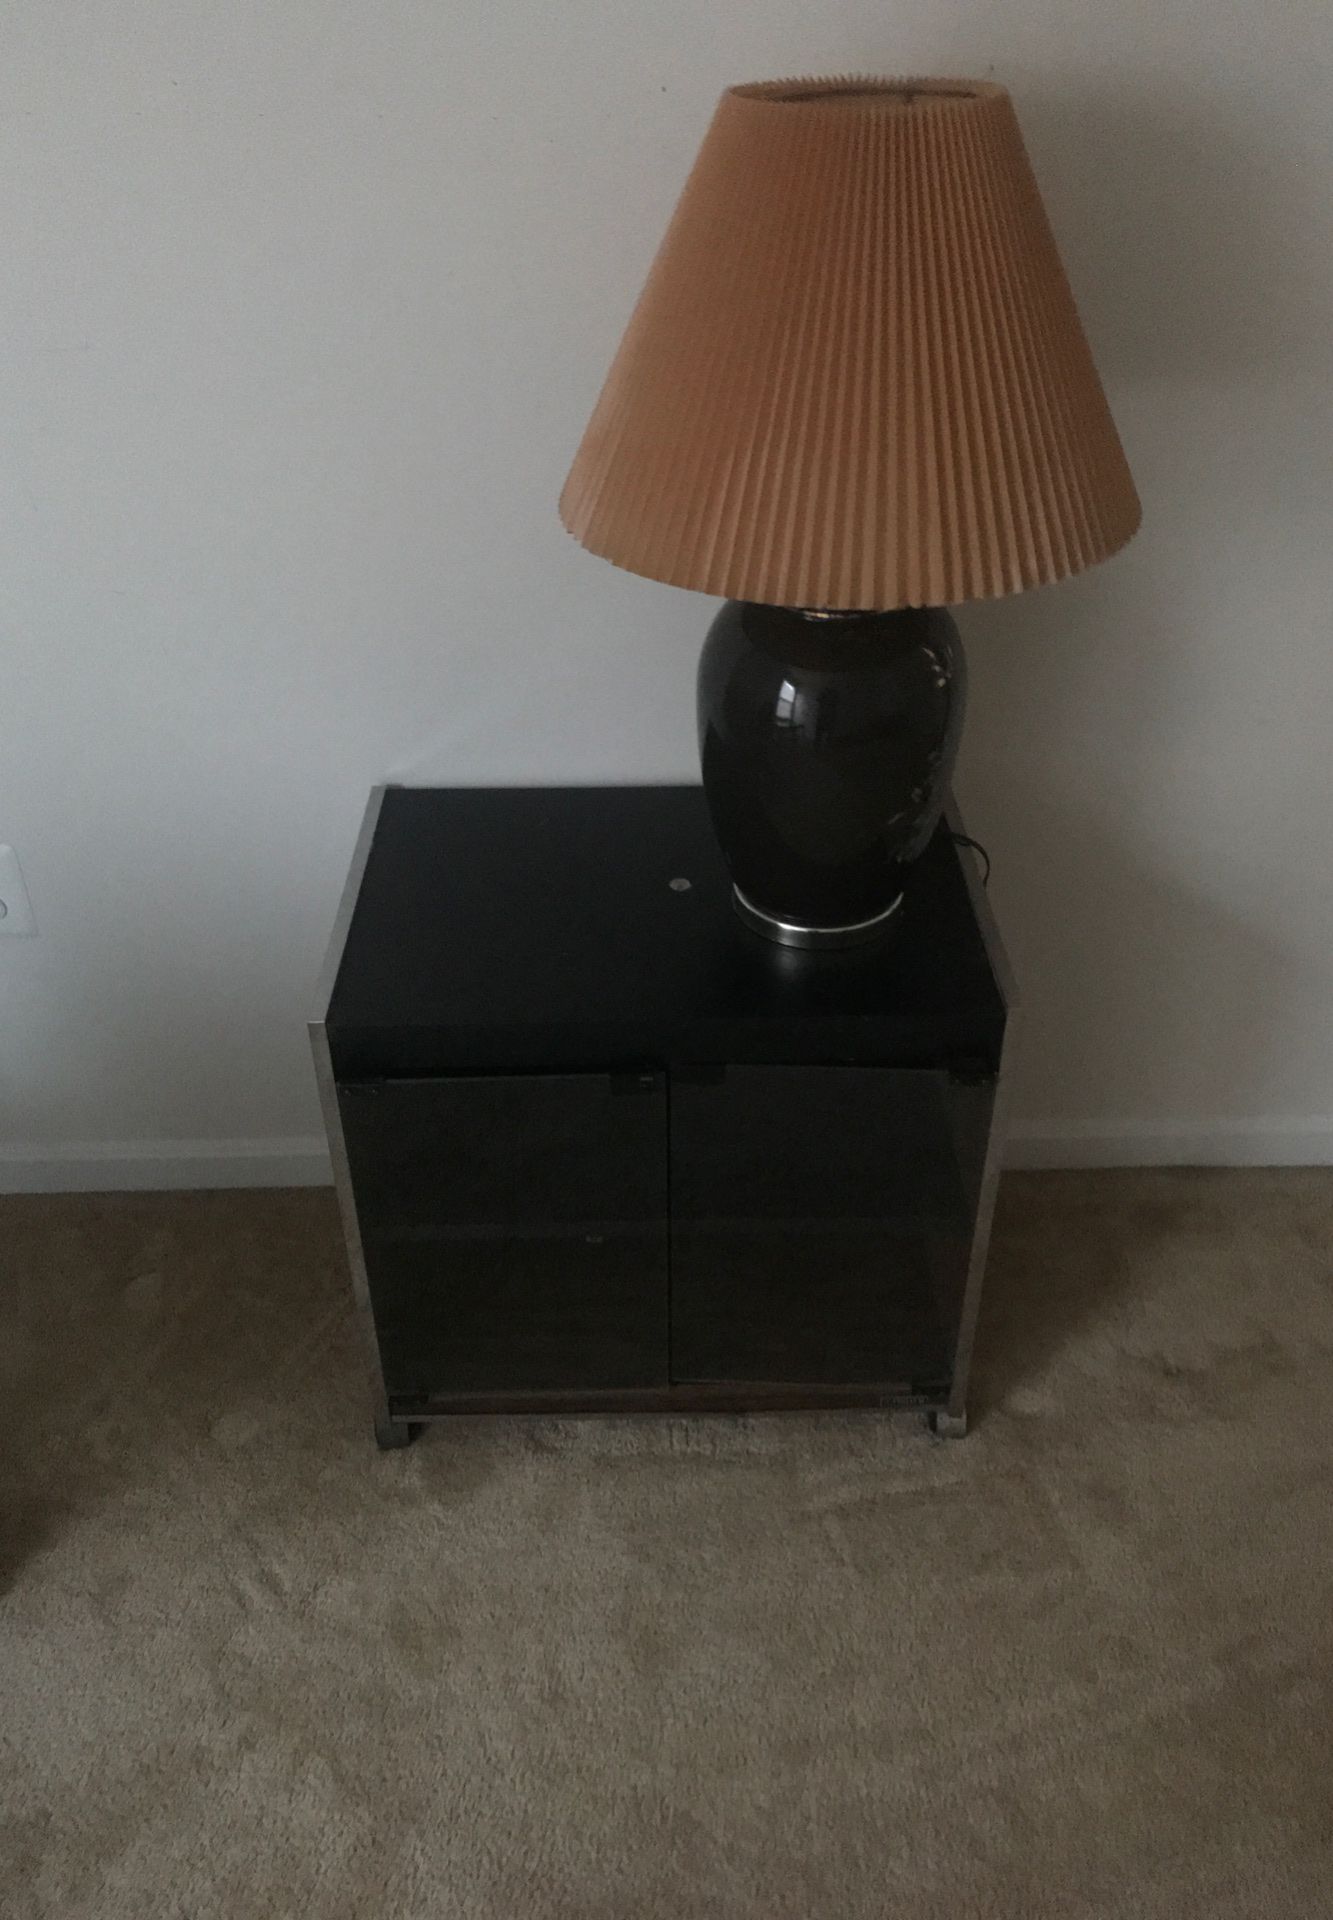 Tv stand with lamp